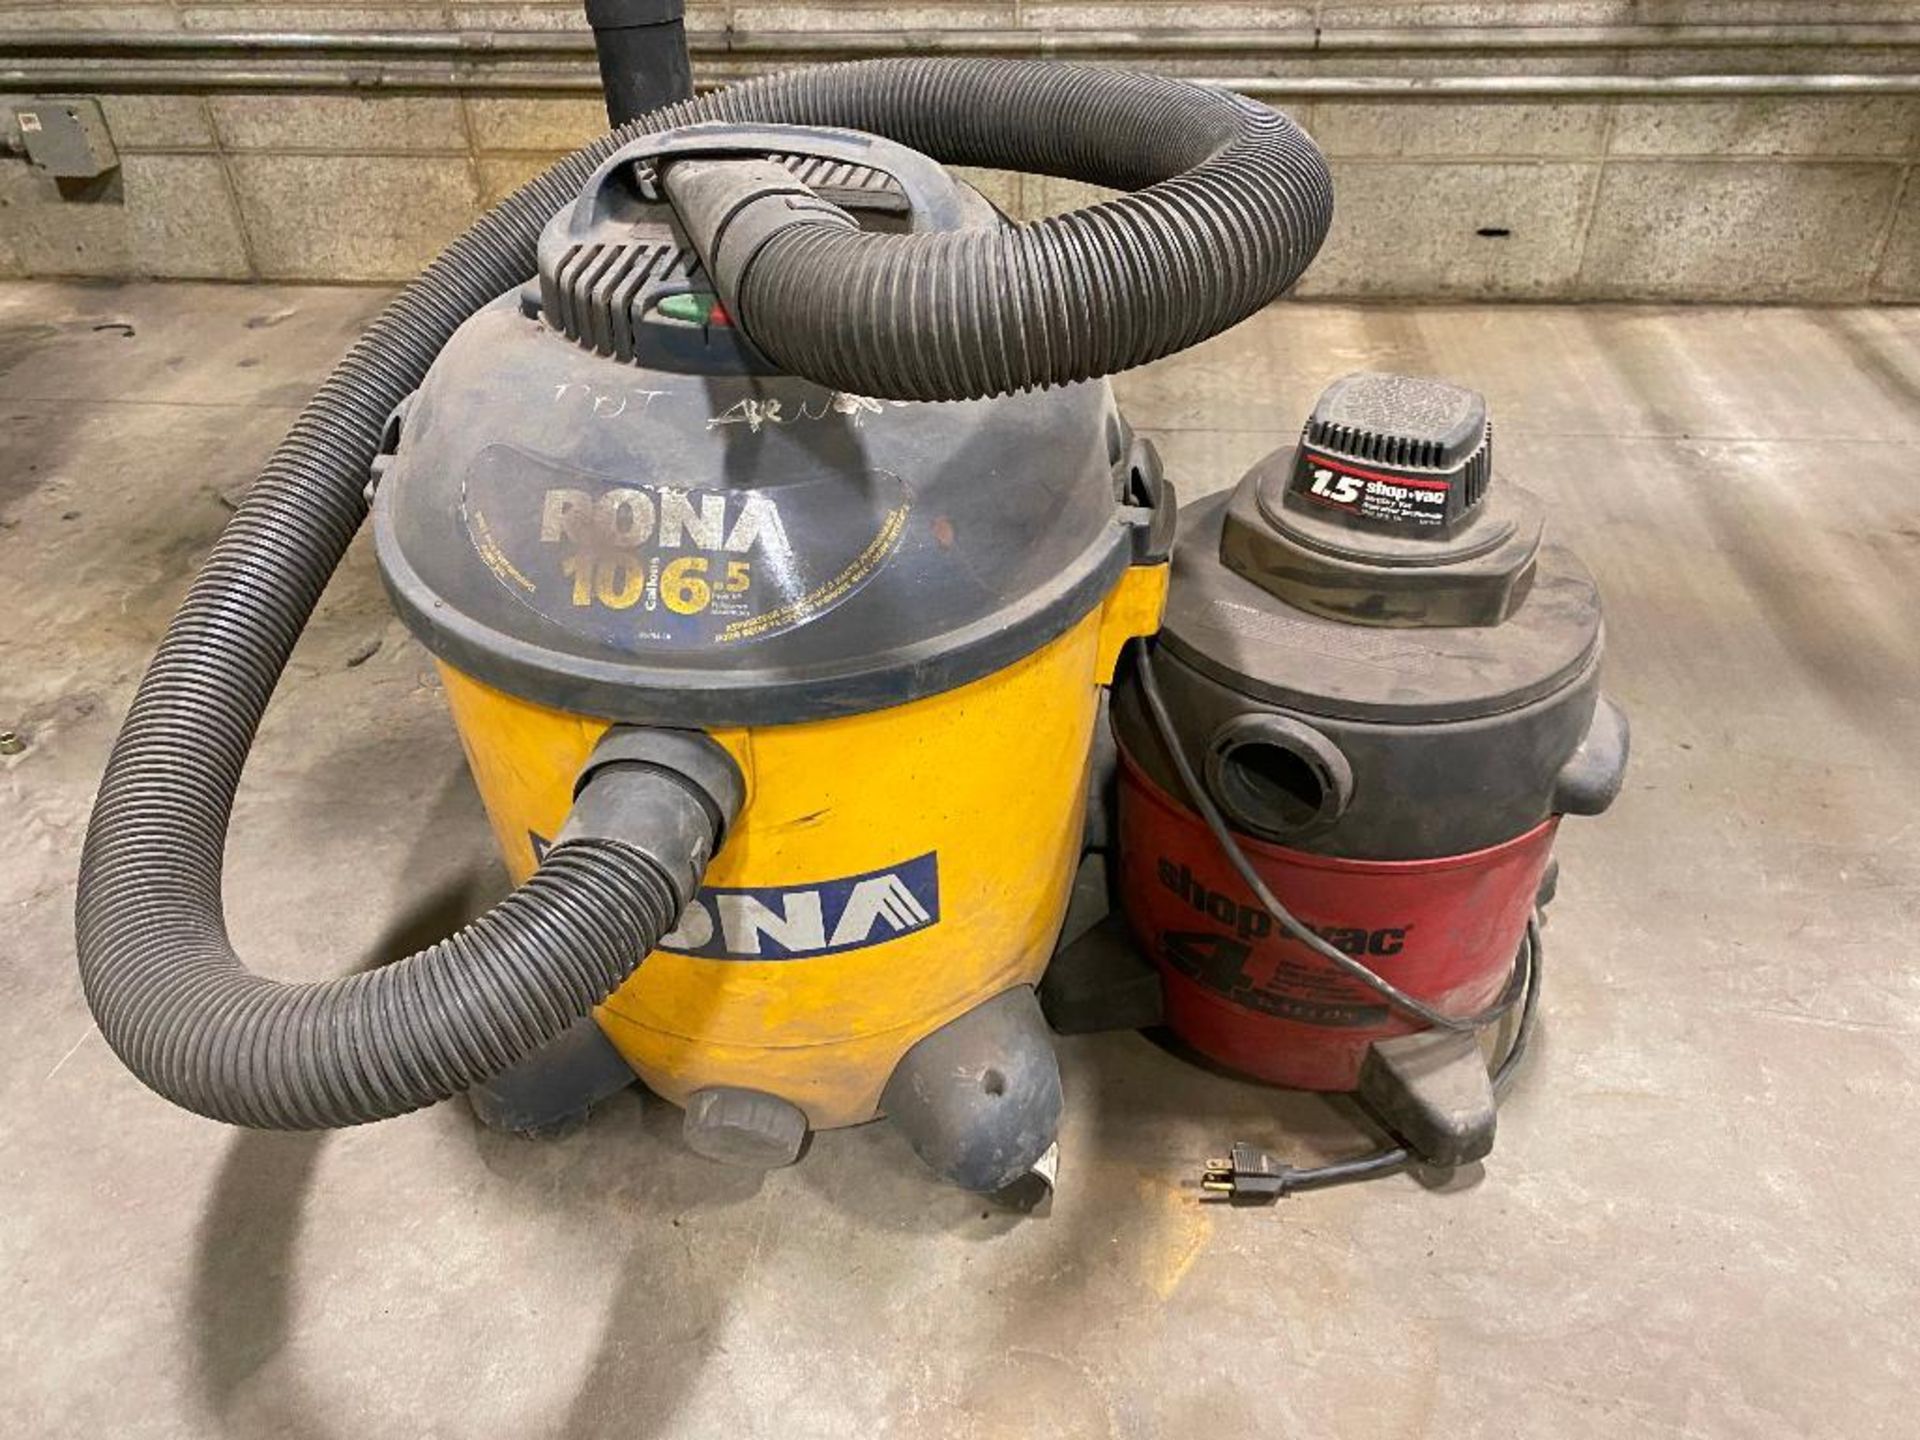 Lot of (2) Asst. Shop Vacuums - Image 2 of 3